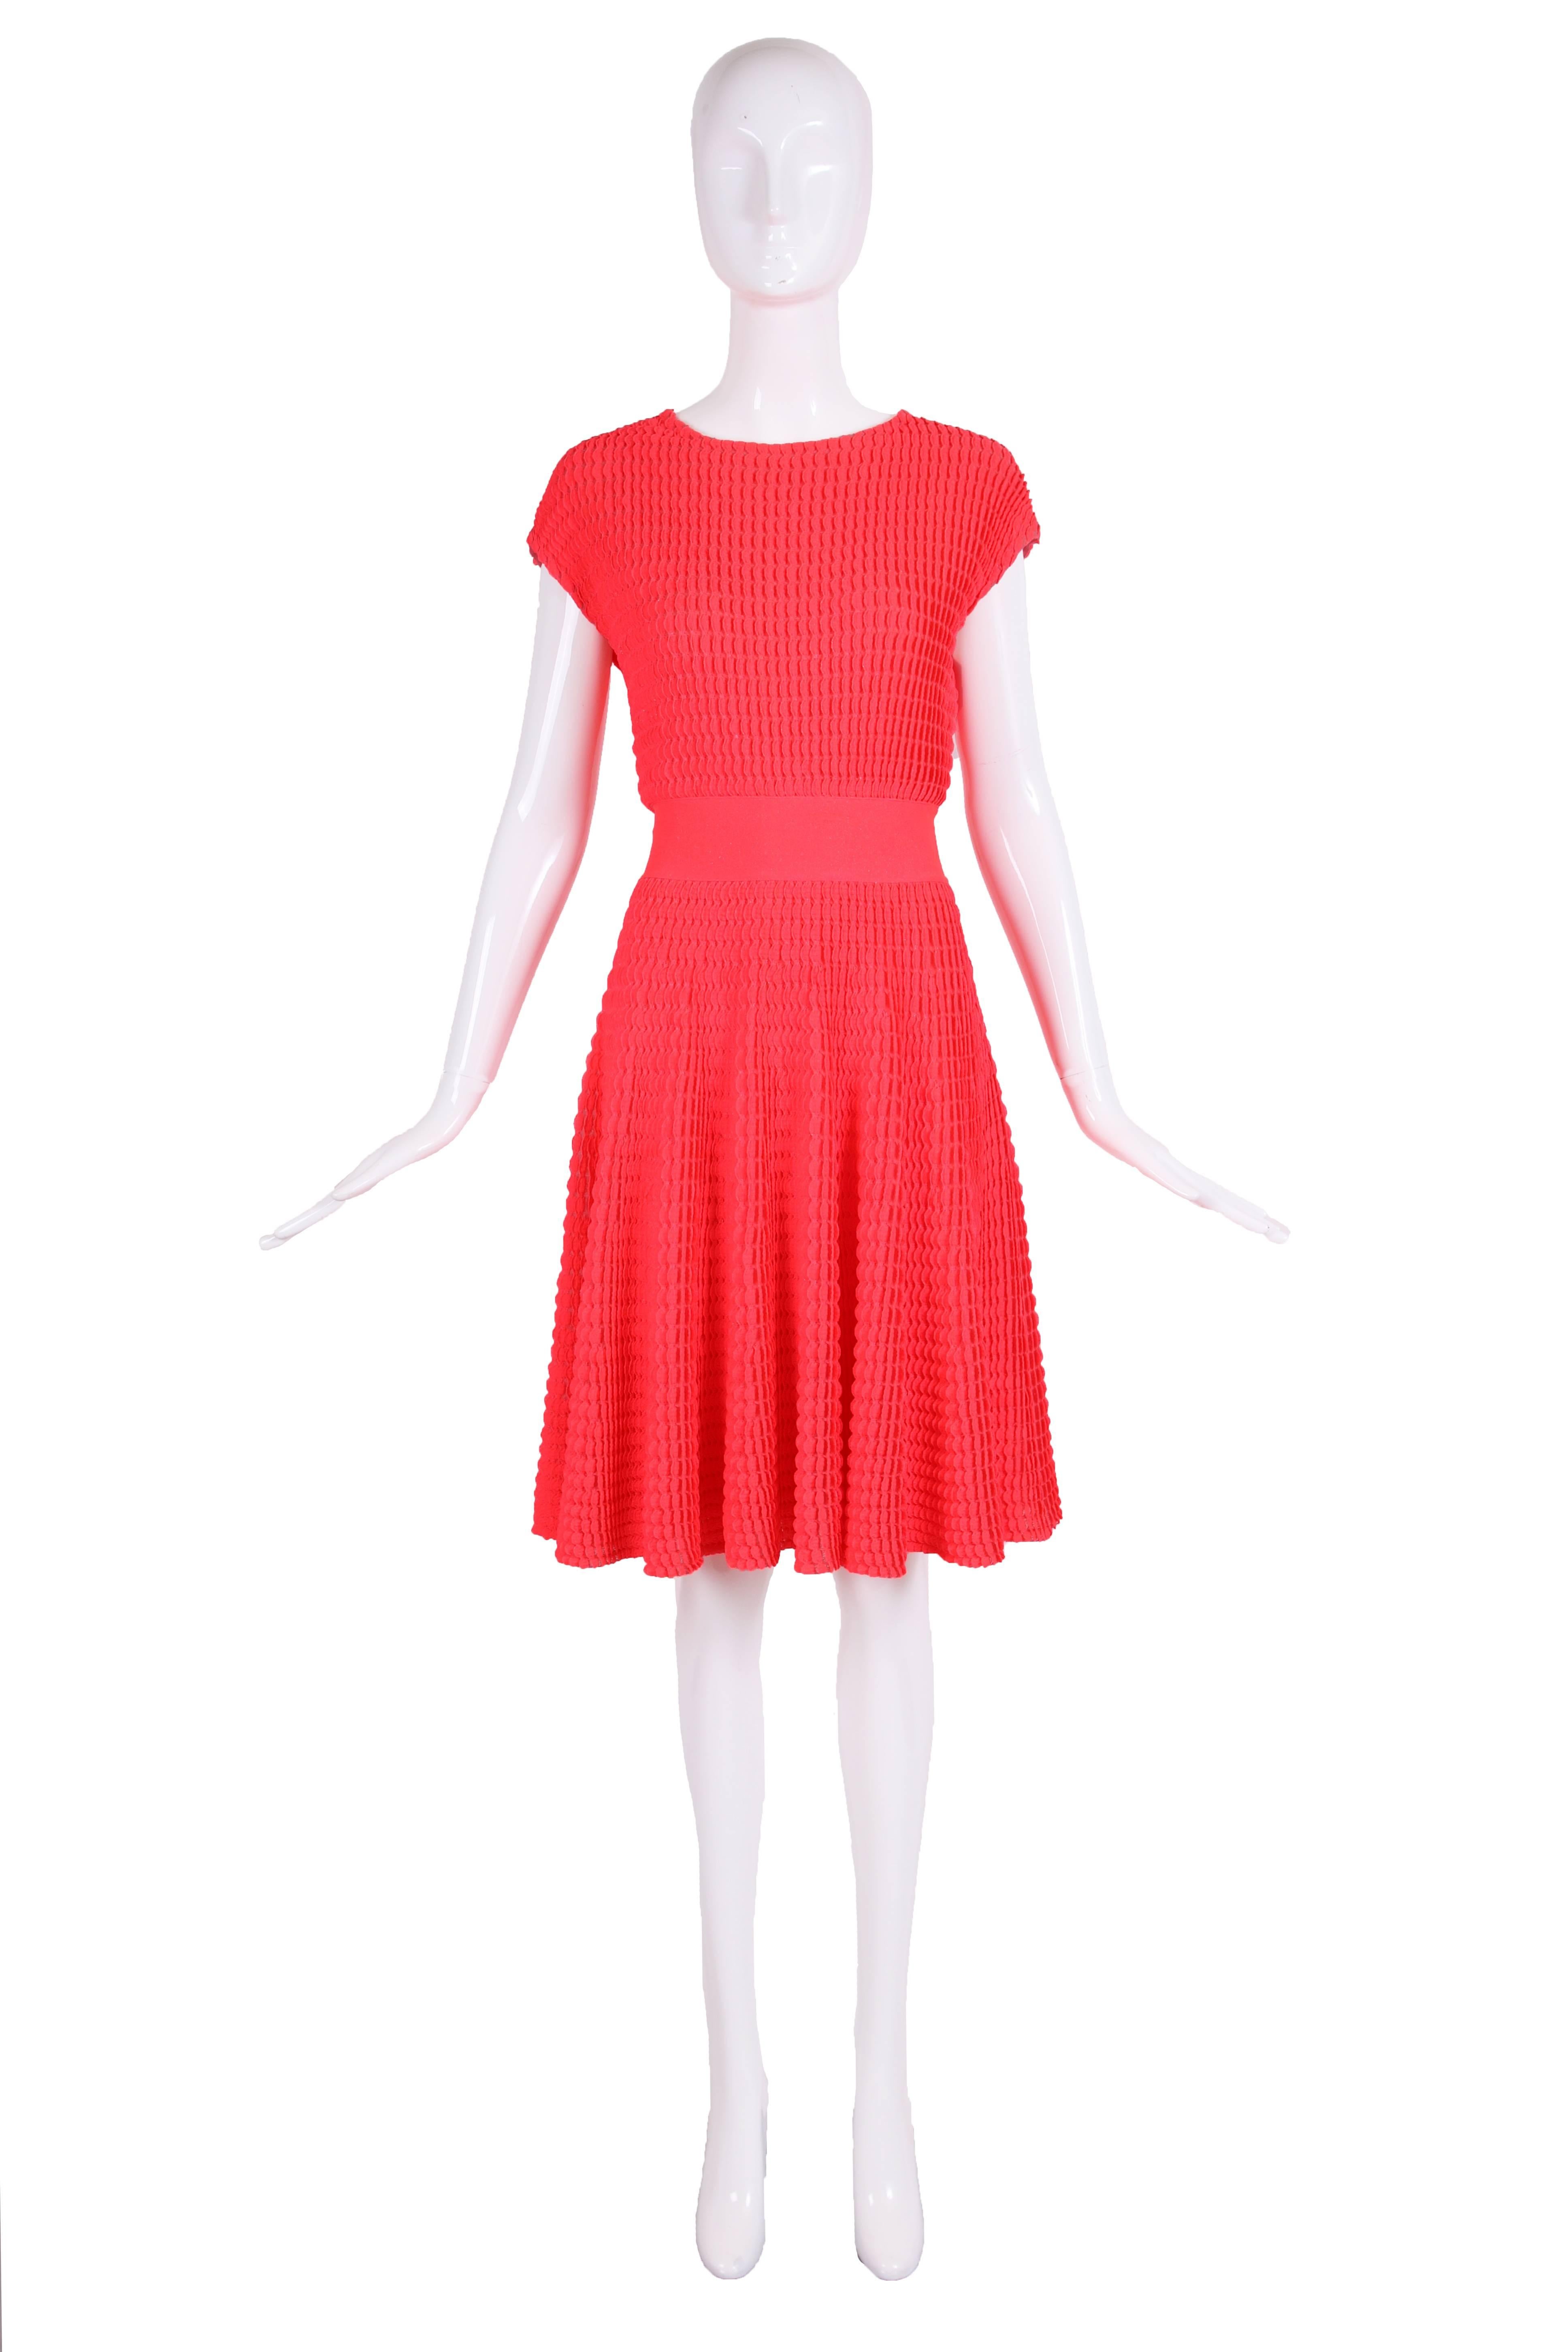 2013 Christian Dior by Raf Simons neon pink stretch cocktail or day dress with flair skirt. The fabric is textured - please see photos. In excellent condition - size tag 8.
MEASUREMENTS:
Bust - 36